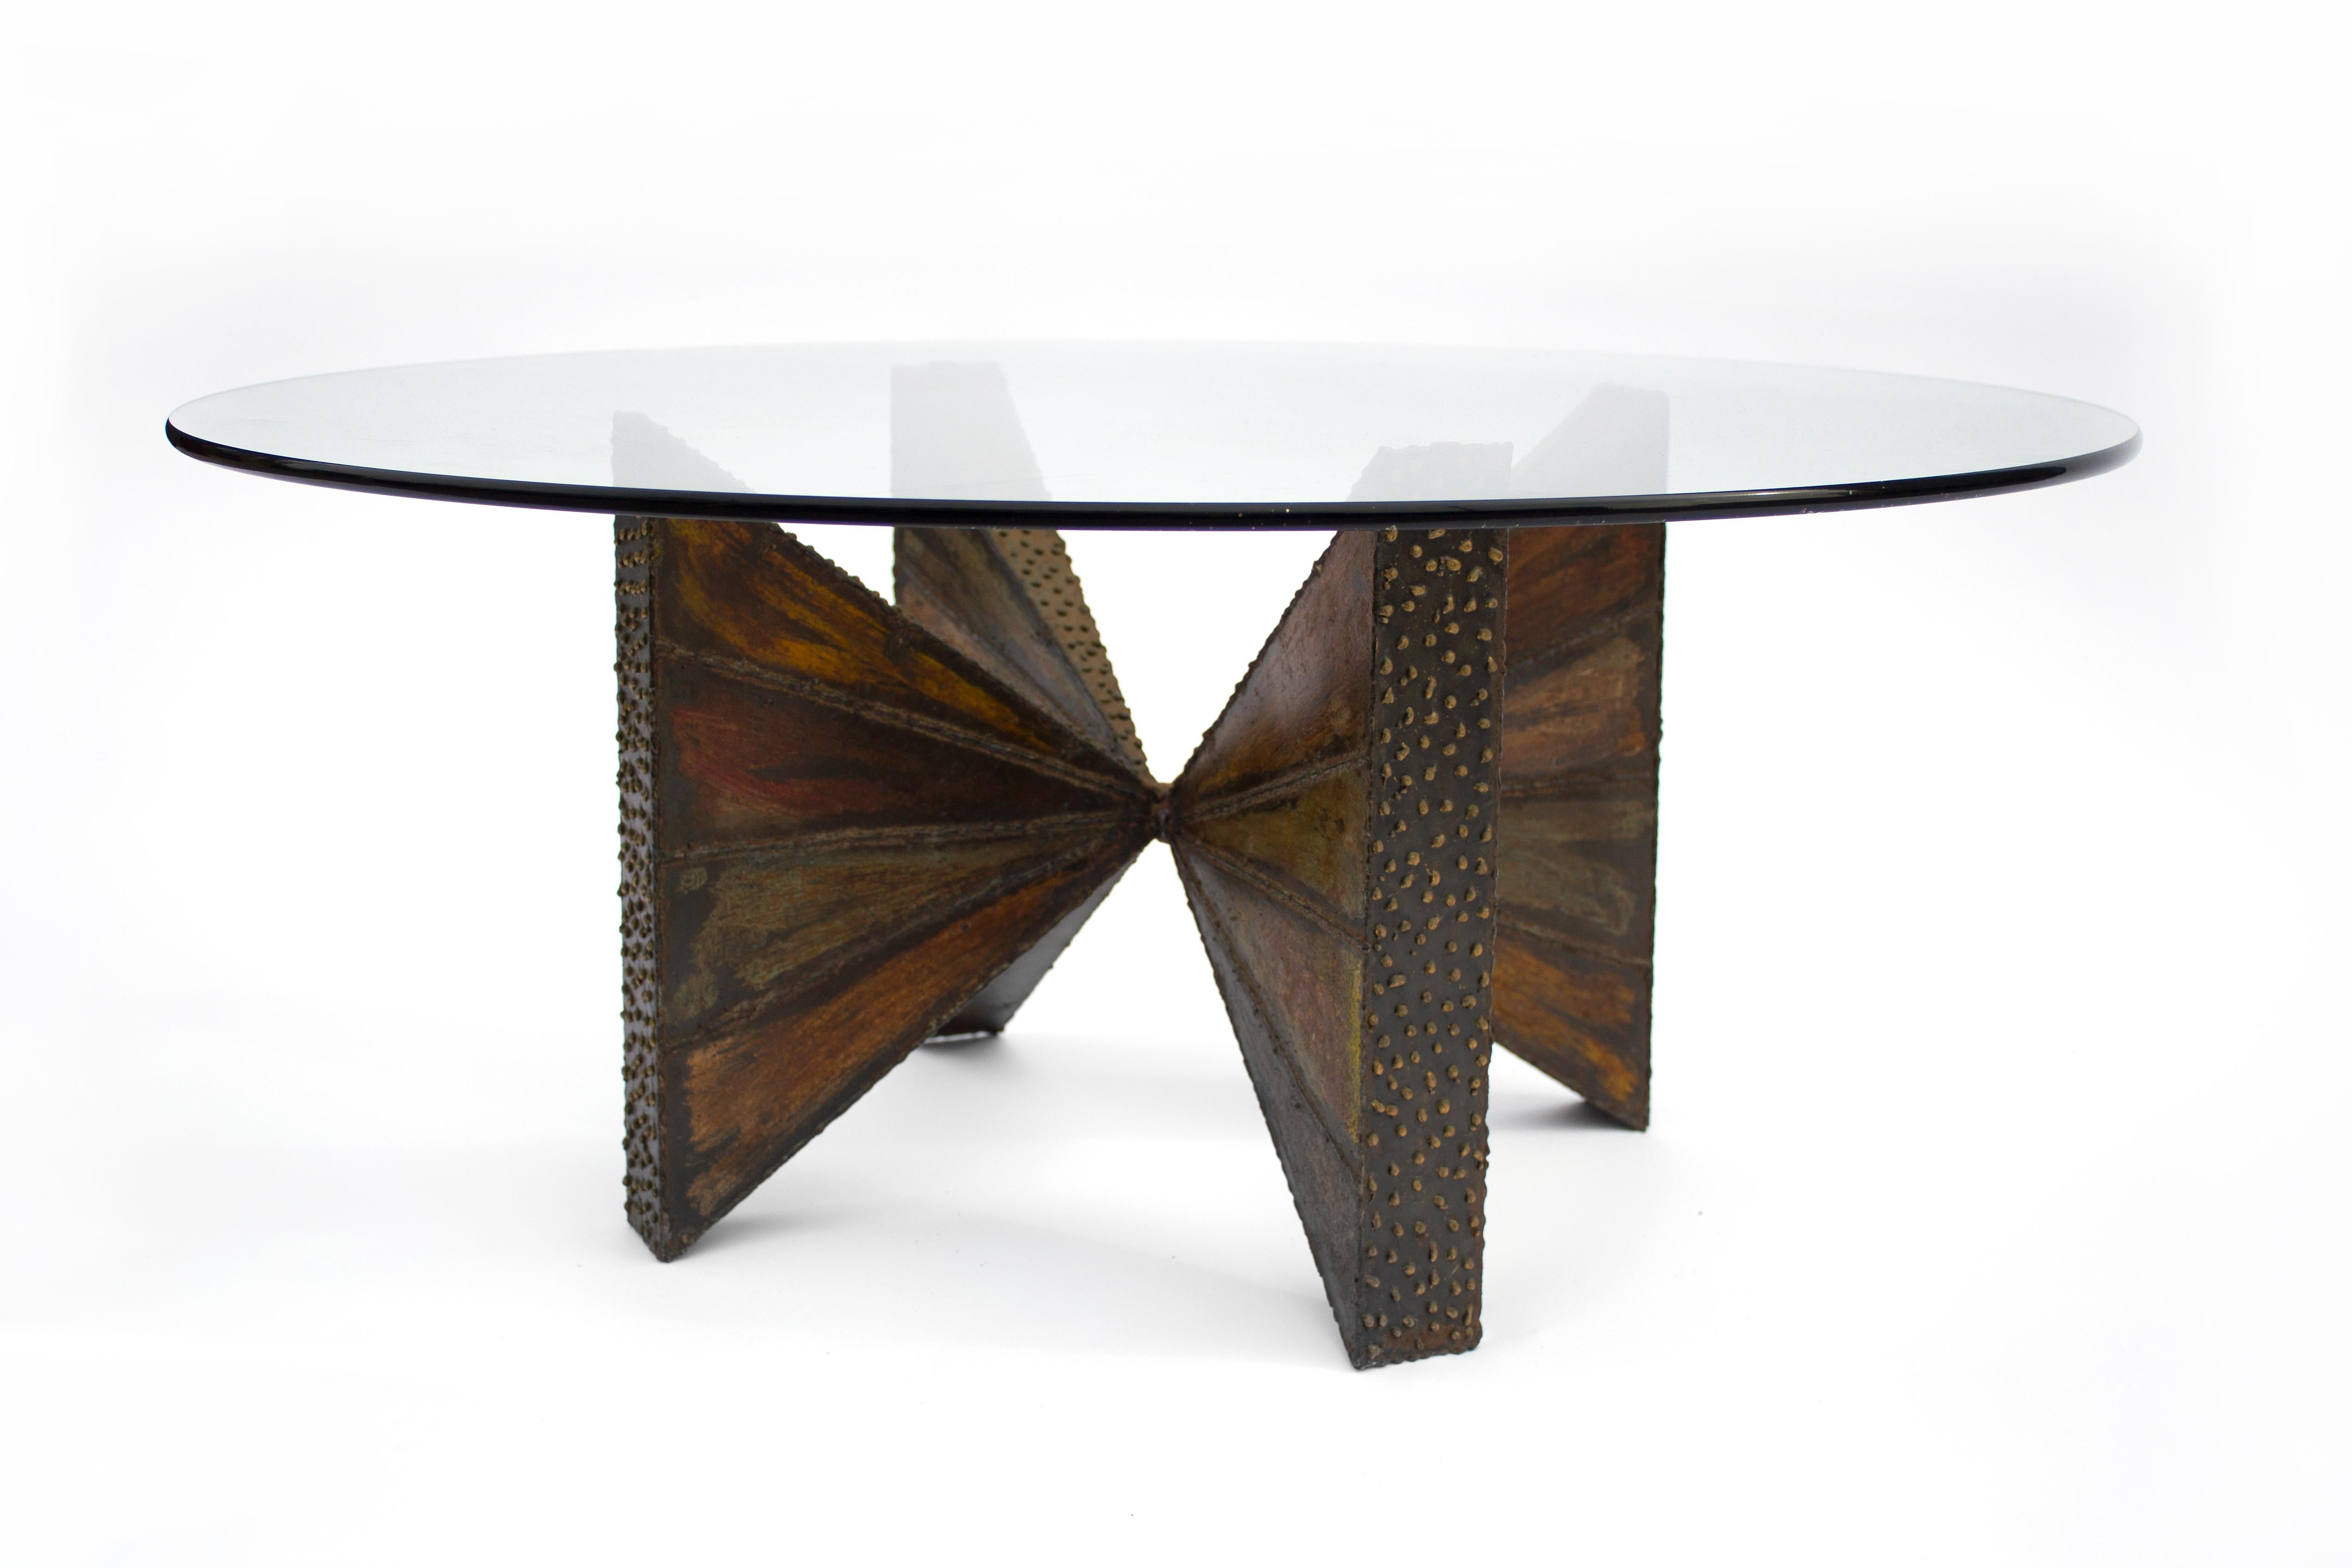 Welded and patinated steel coffee table by Paul Evans Studio for Directional. Table is in excellent condition.